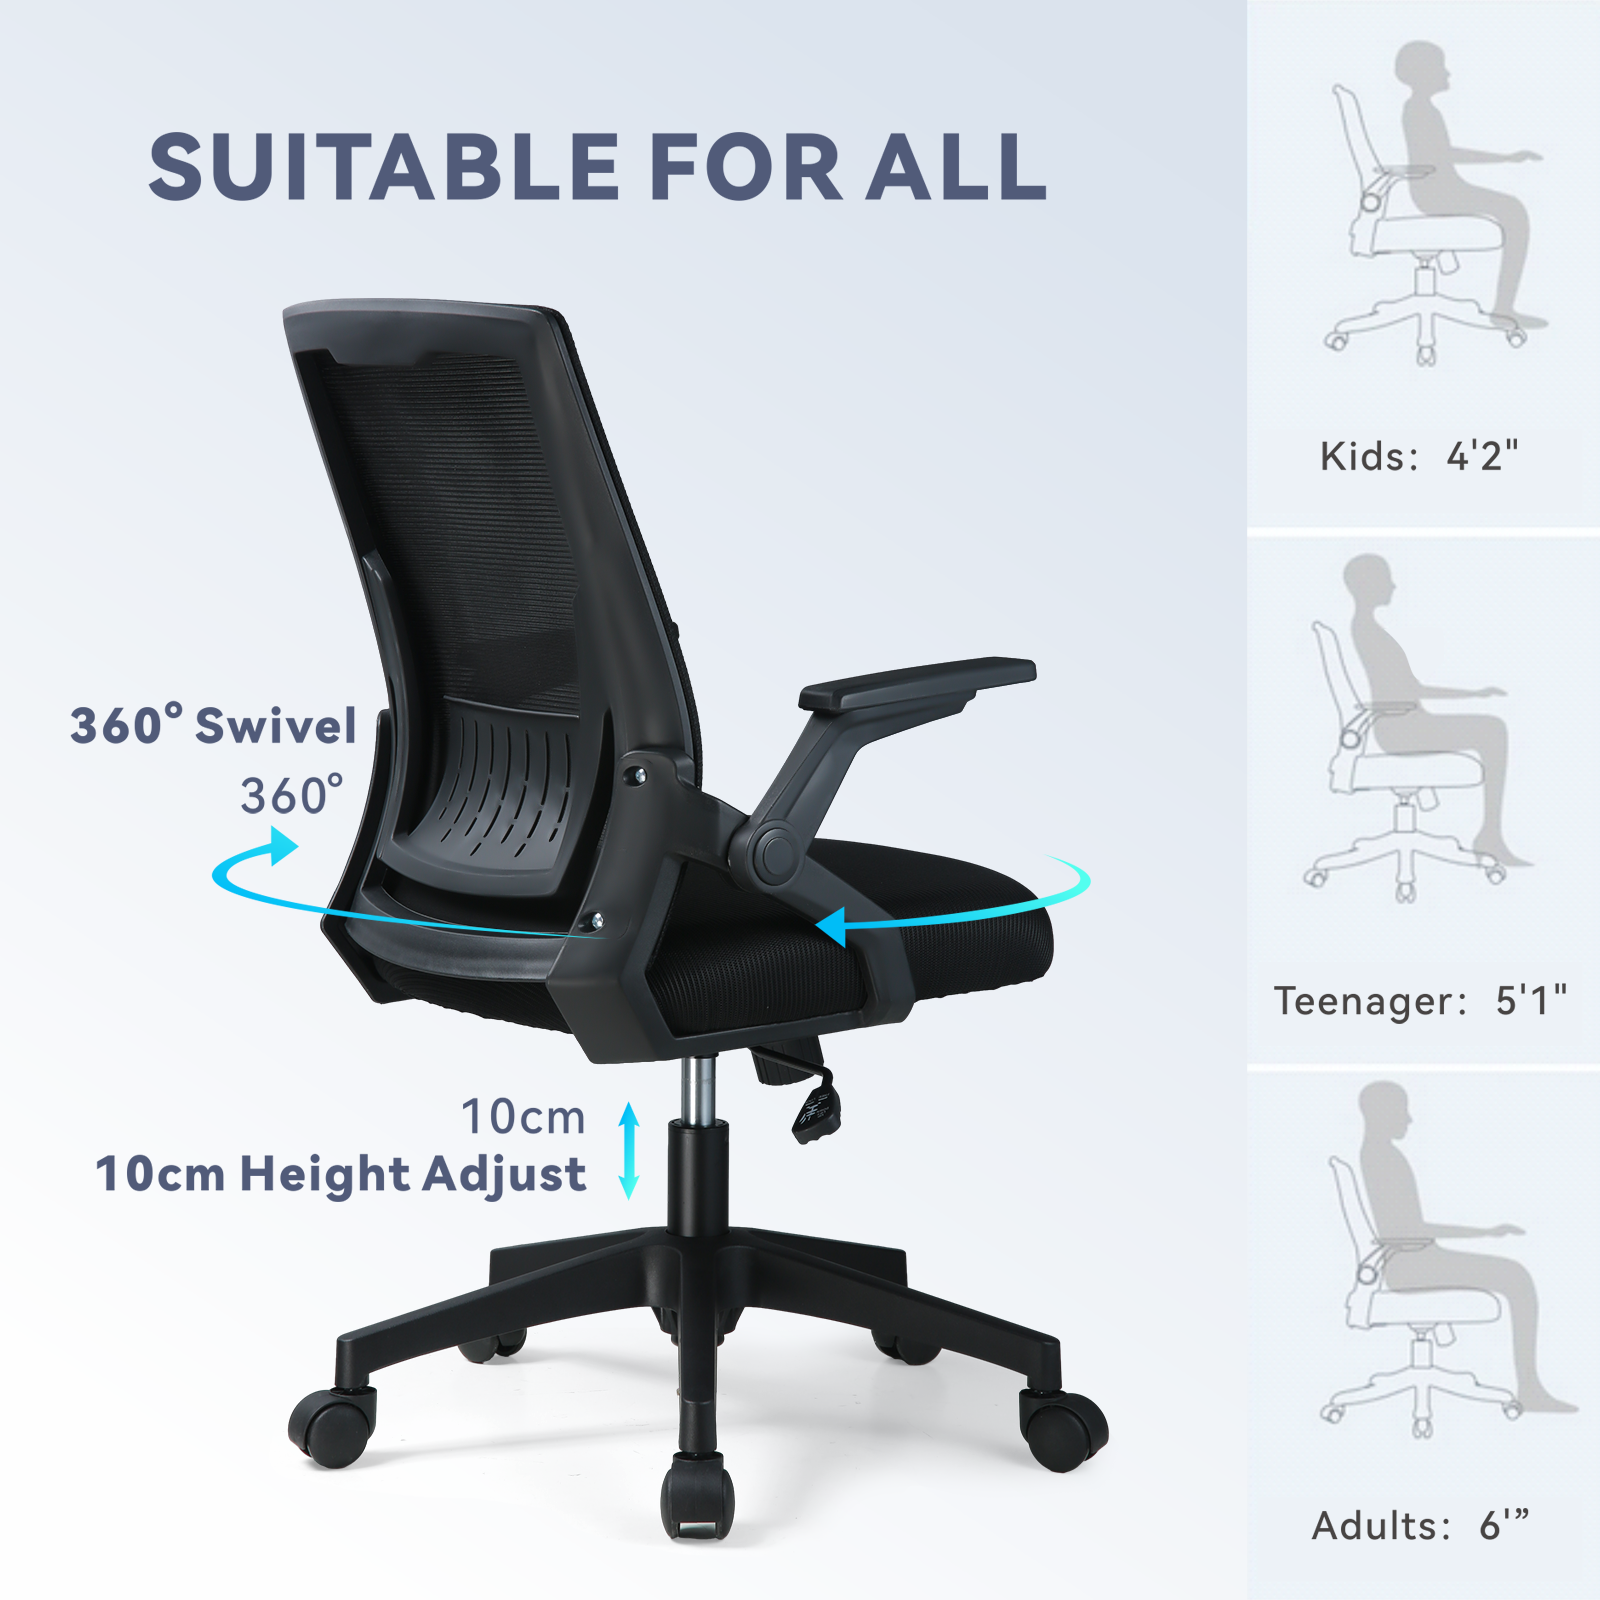 COMHOMA Mesh Office Chair with Flip-Up Armrests Mid Back Computer Chair, Black - image 2 of 8